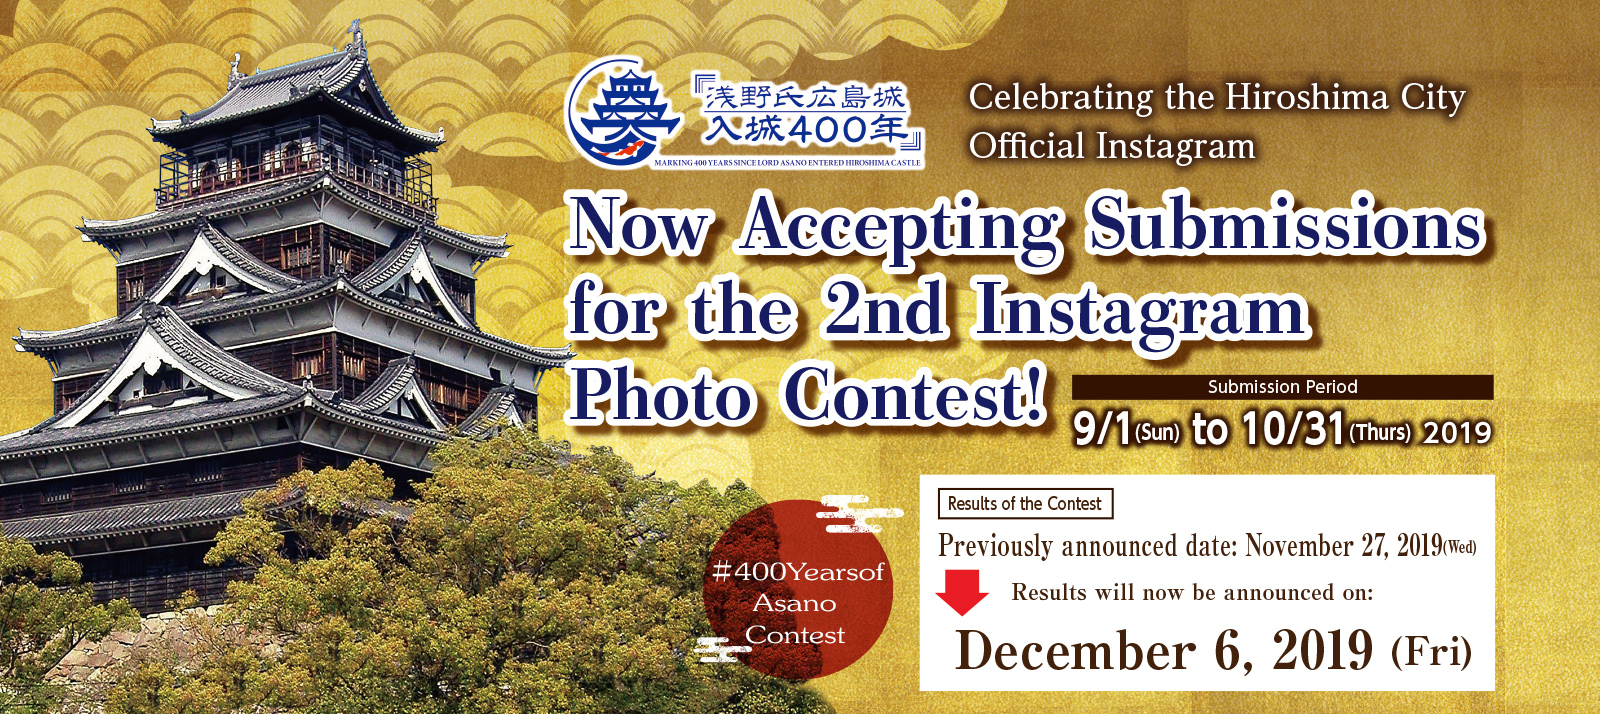 Now Accepting Submissions
for the 2nd Instagram
Photo Contest!